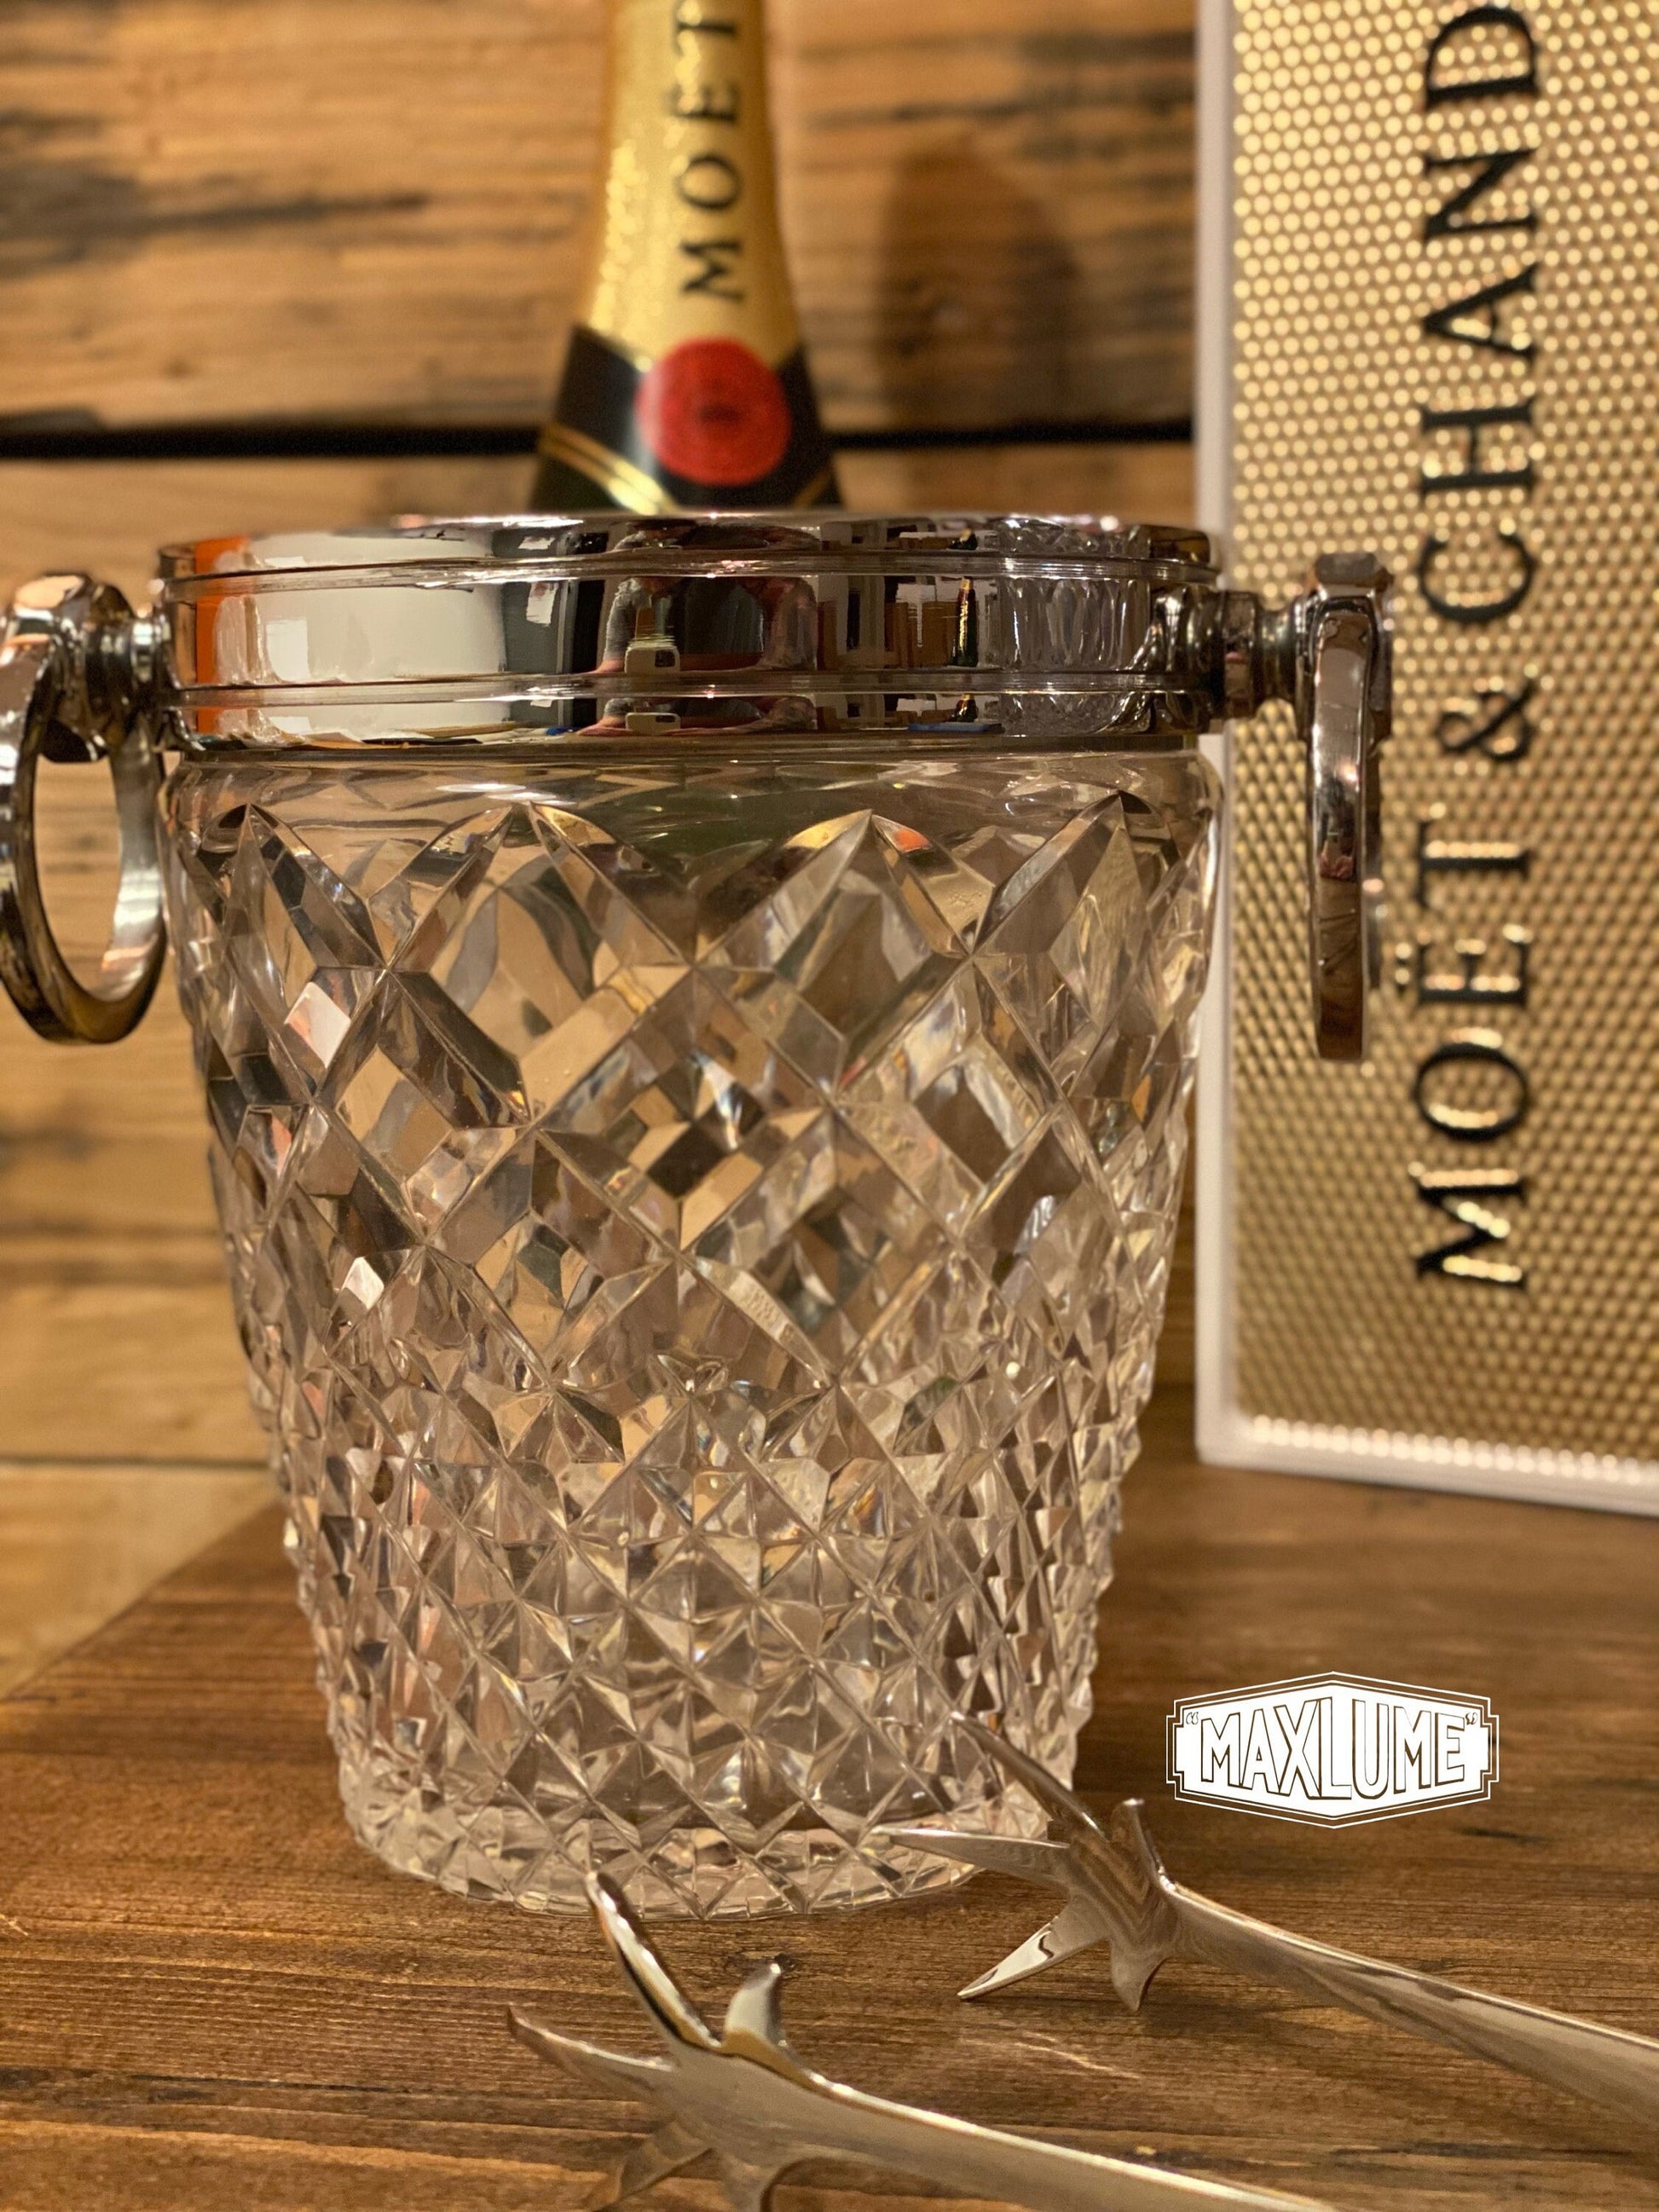 Maxlume ~ Luxury 3 Piece Solid Glass Hand Cut Engraved Wine & Ice Cooler Champagne Glass Bucket French